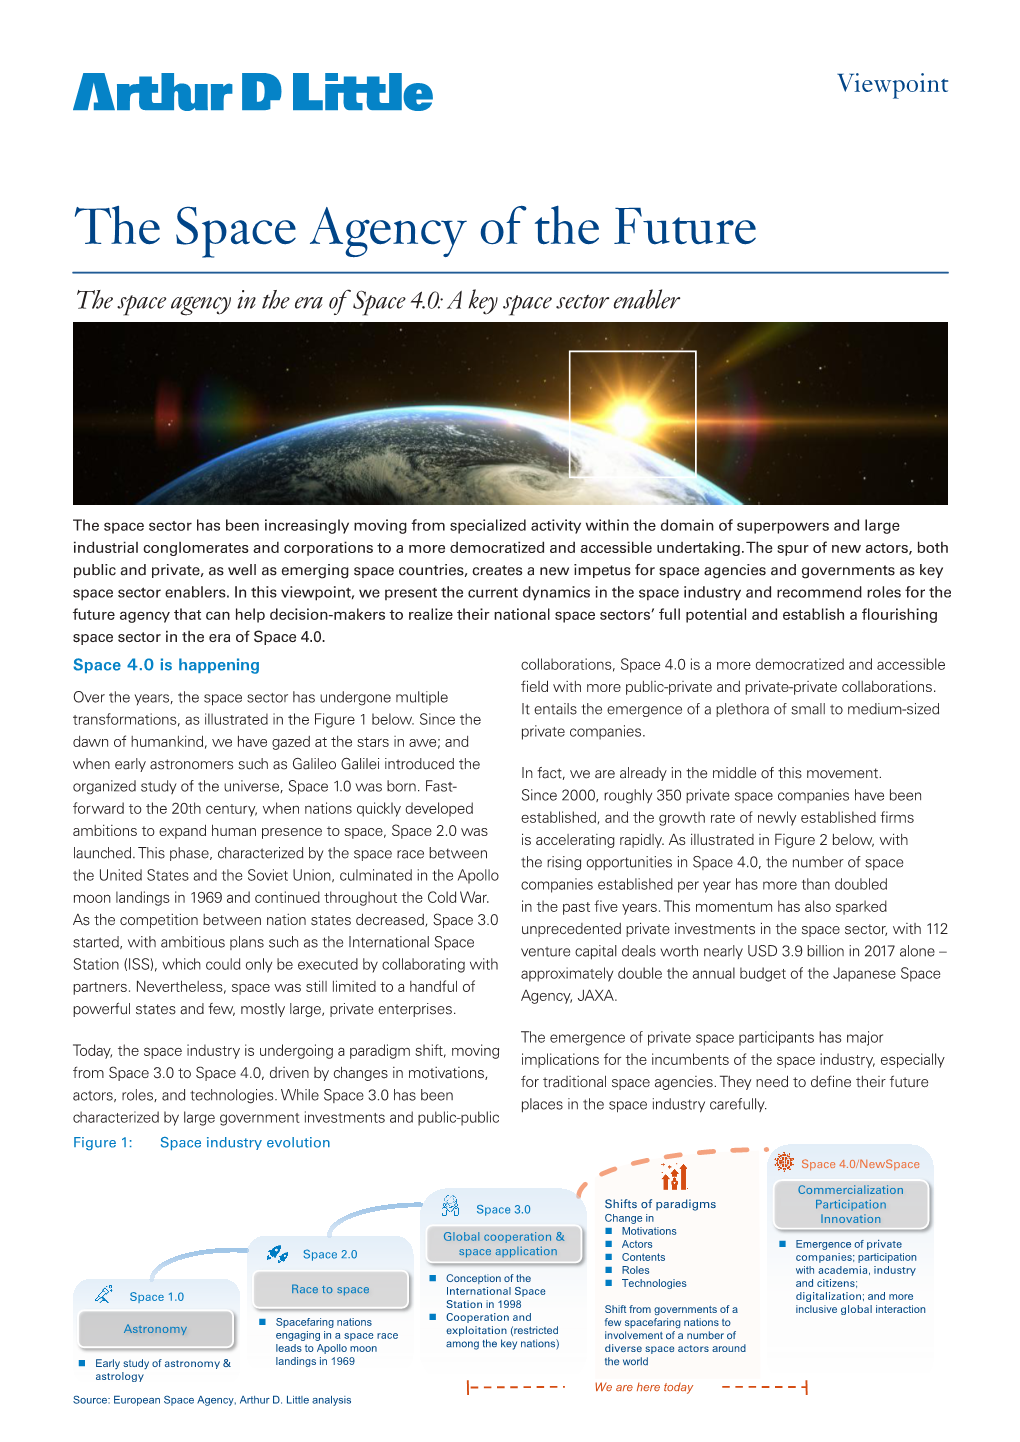 The Space Agency of the Future